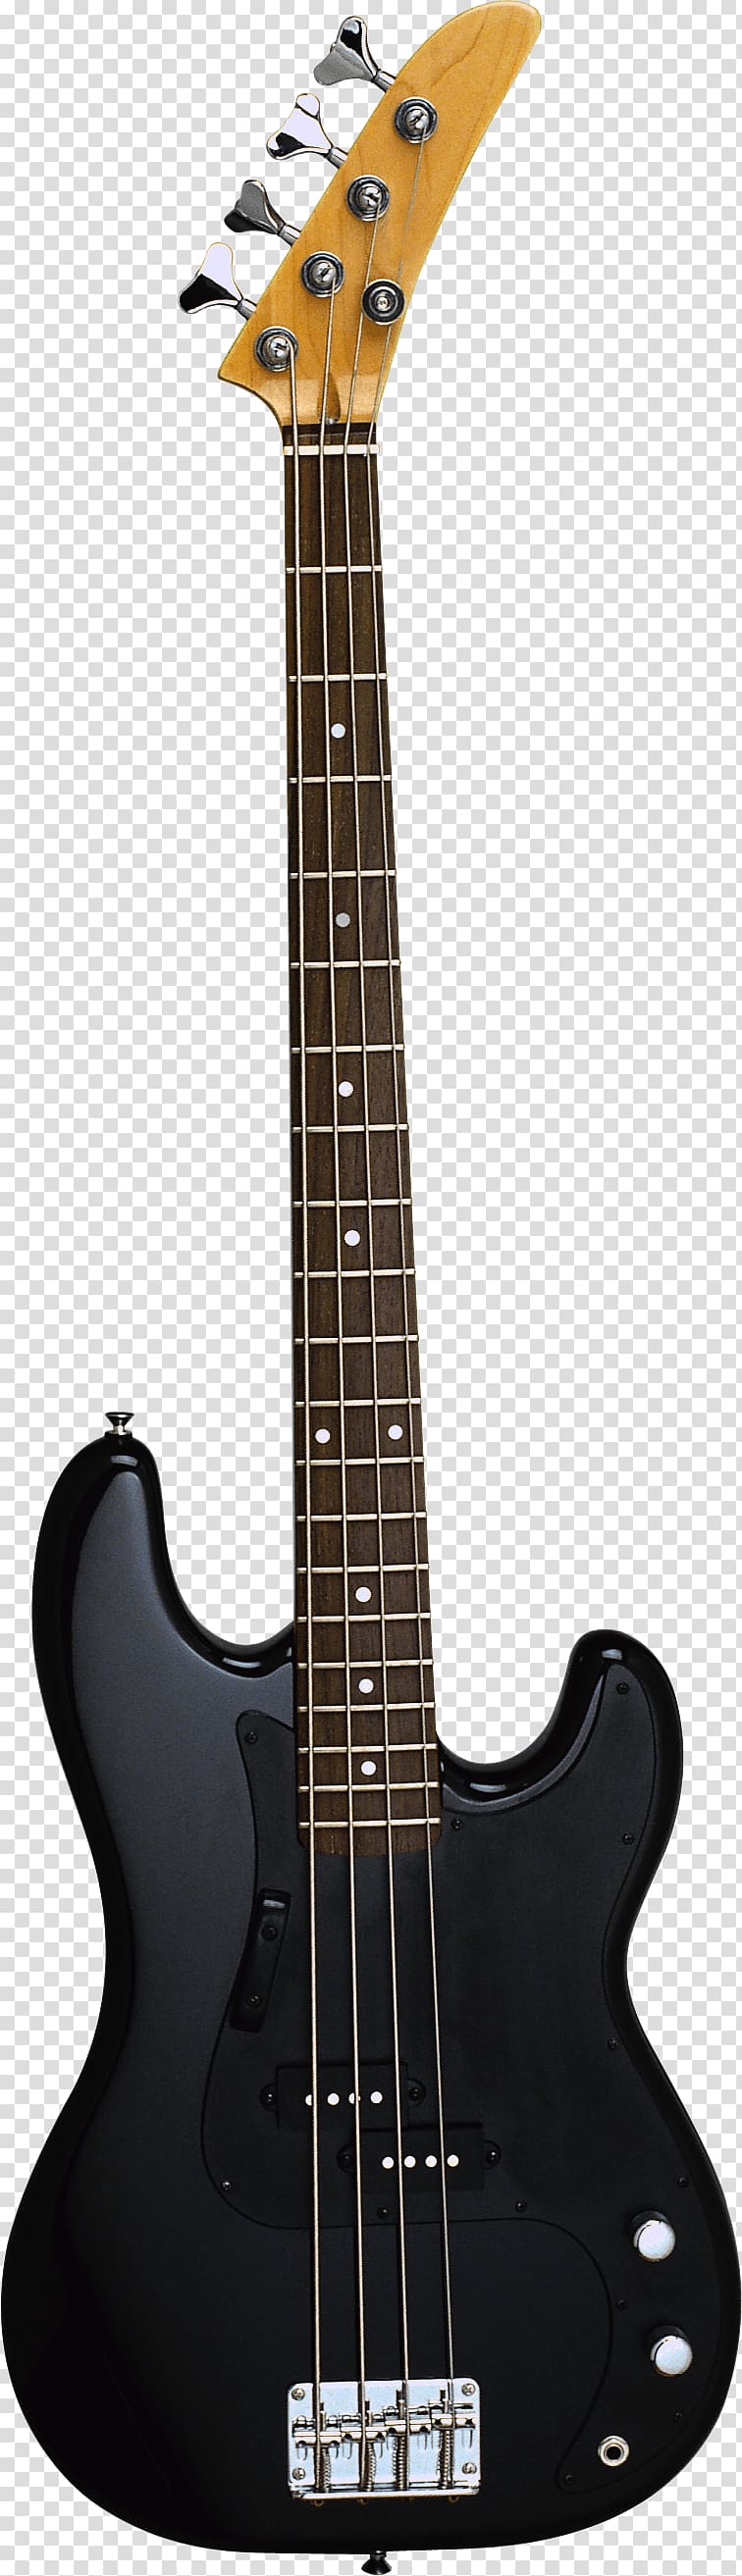 black electric guitar, Black Electric Guitar transparent background PNG clipart